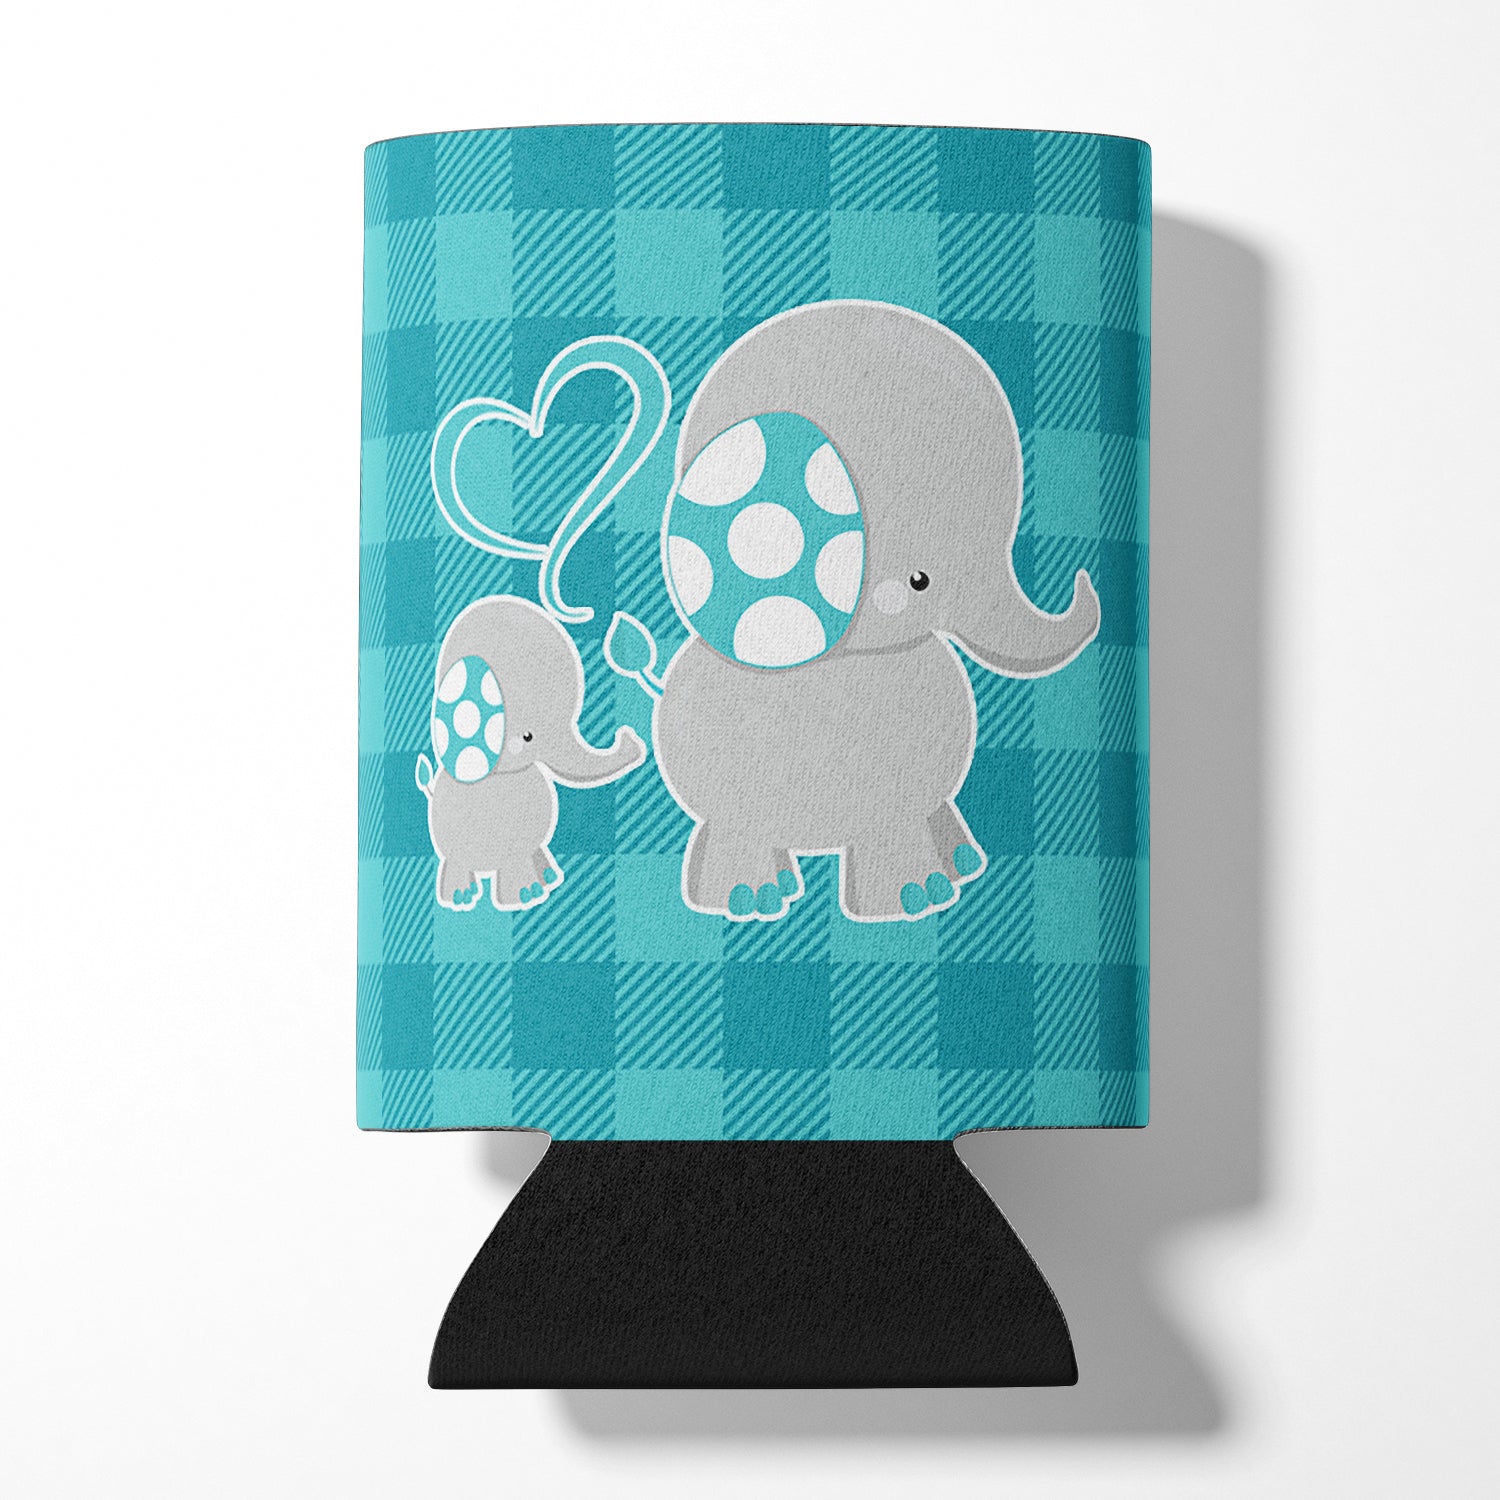 Mommy and Baby Elephant Can or Bottle Hugger BB6834CC